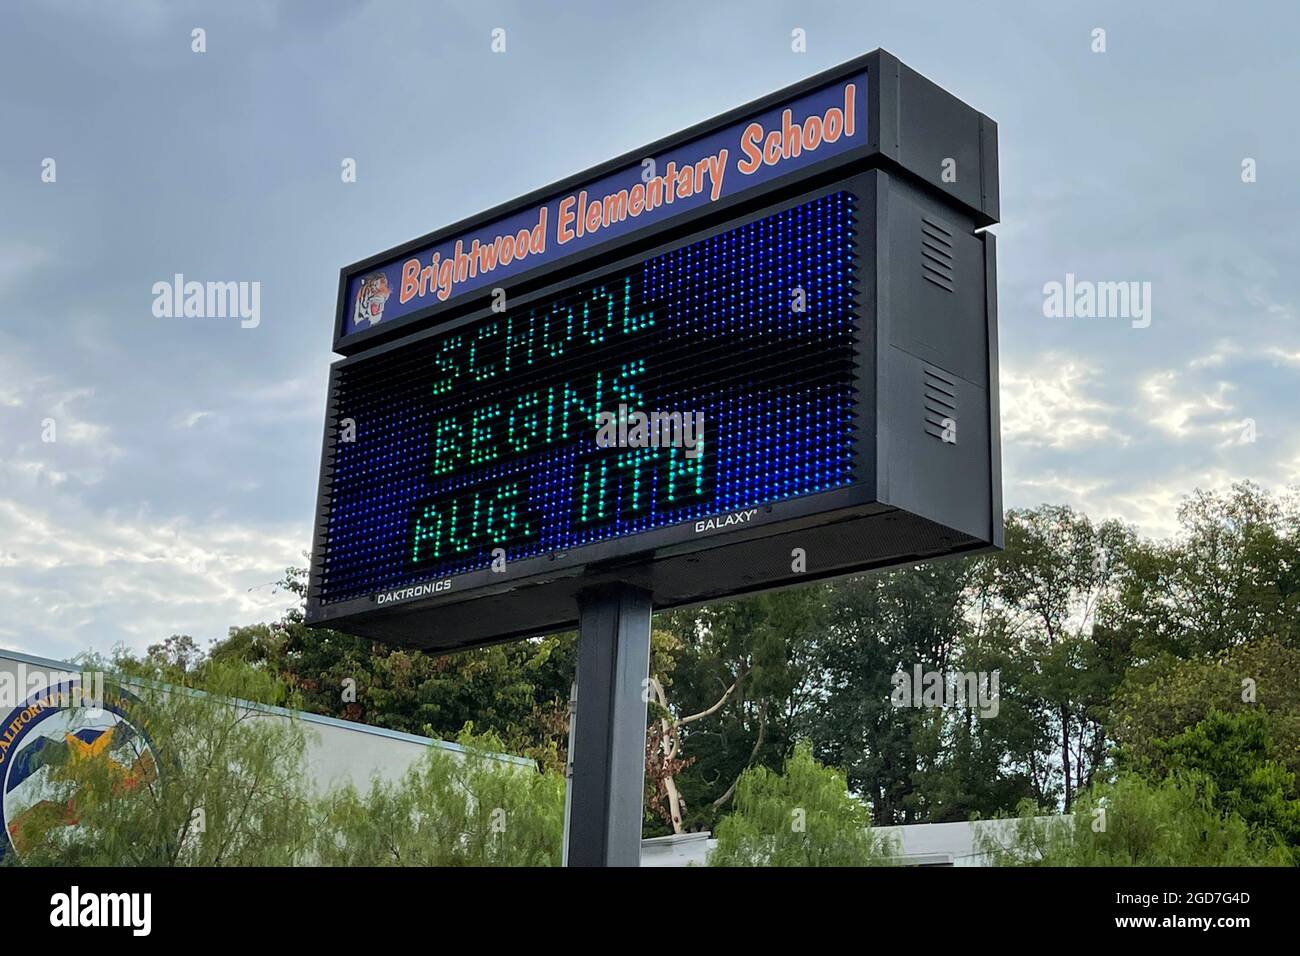 A School Begins Aug. 11 sign at Brightwood Elementary School, Wednesday, Aug. 11, 2021, in Monterey Park, Calif. Stock Photo